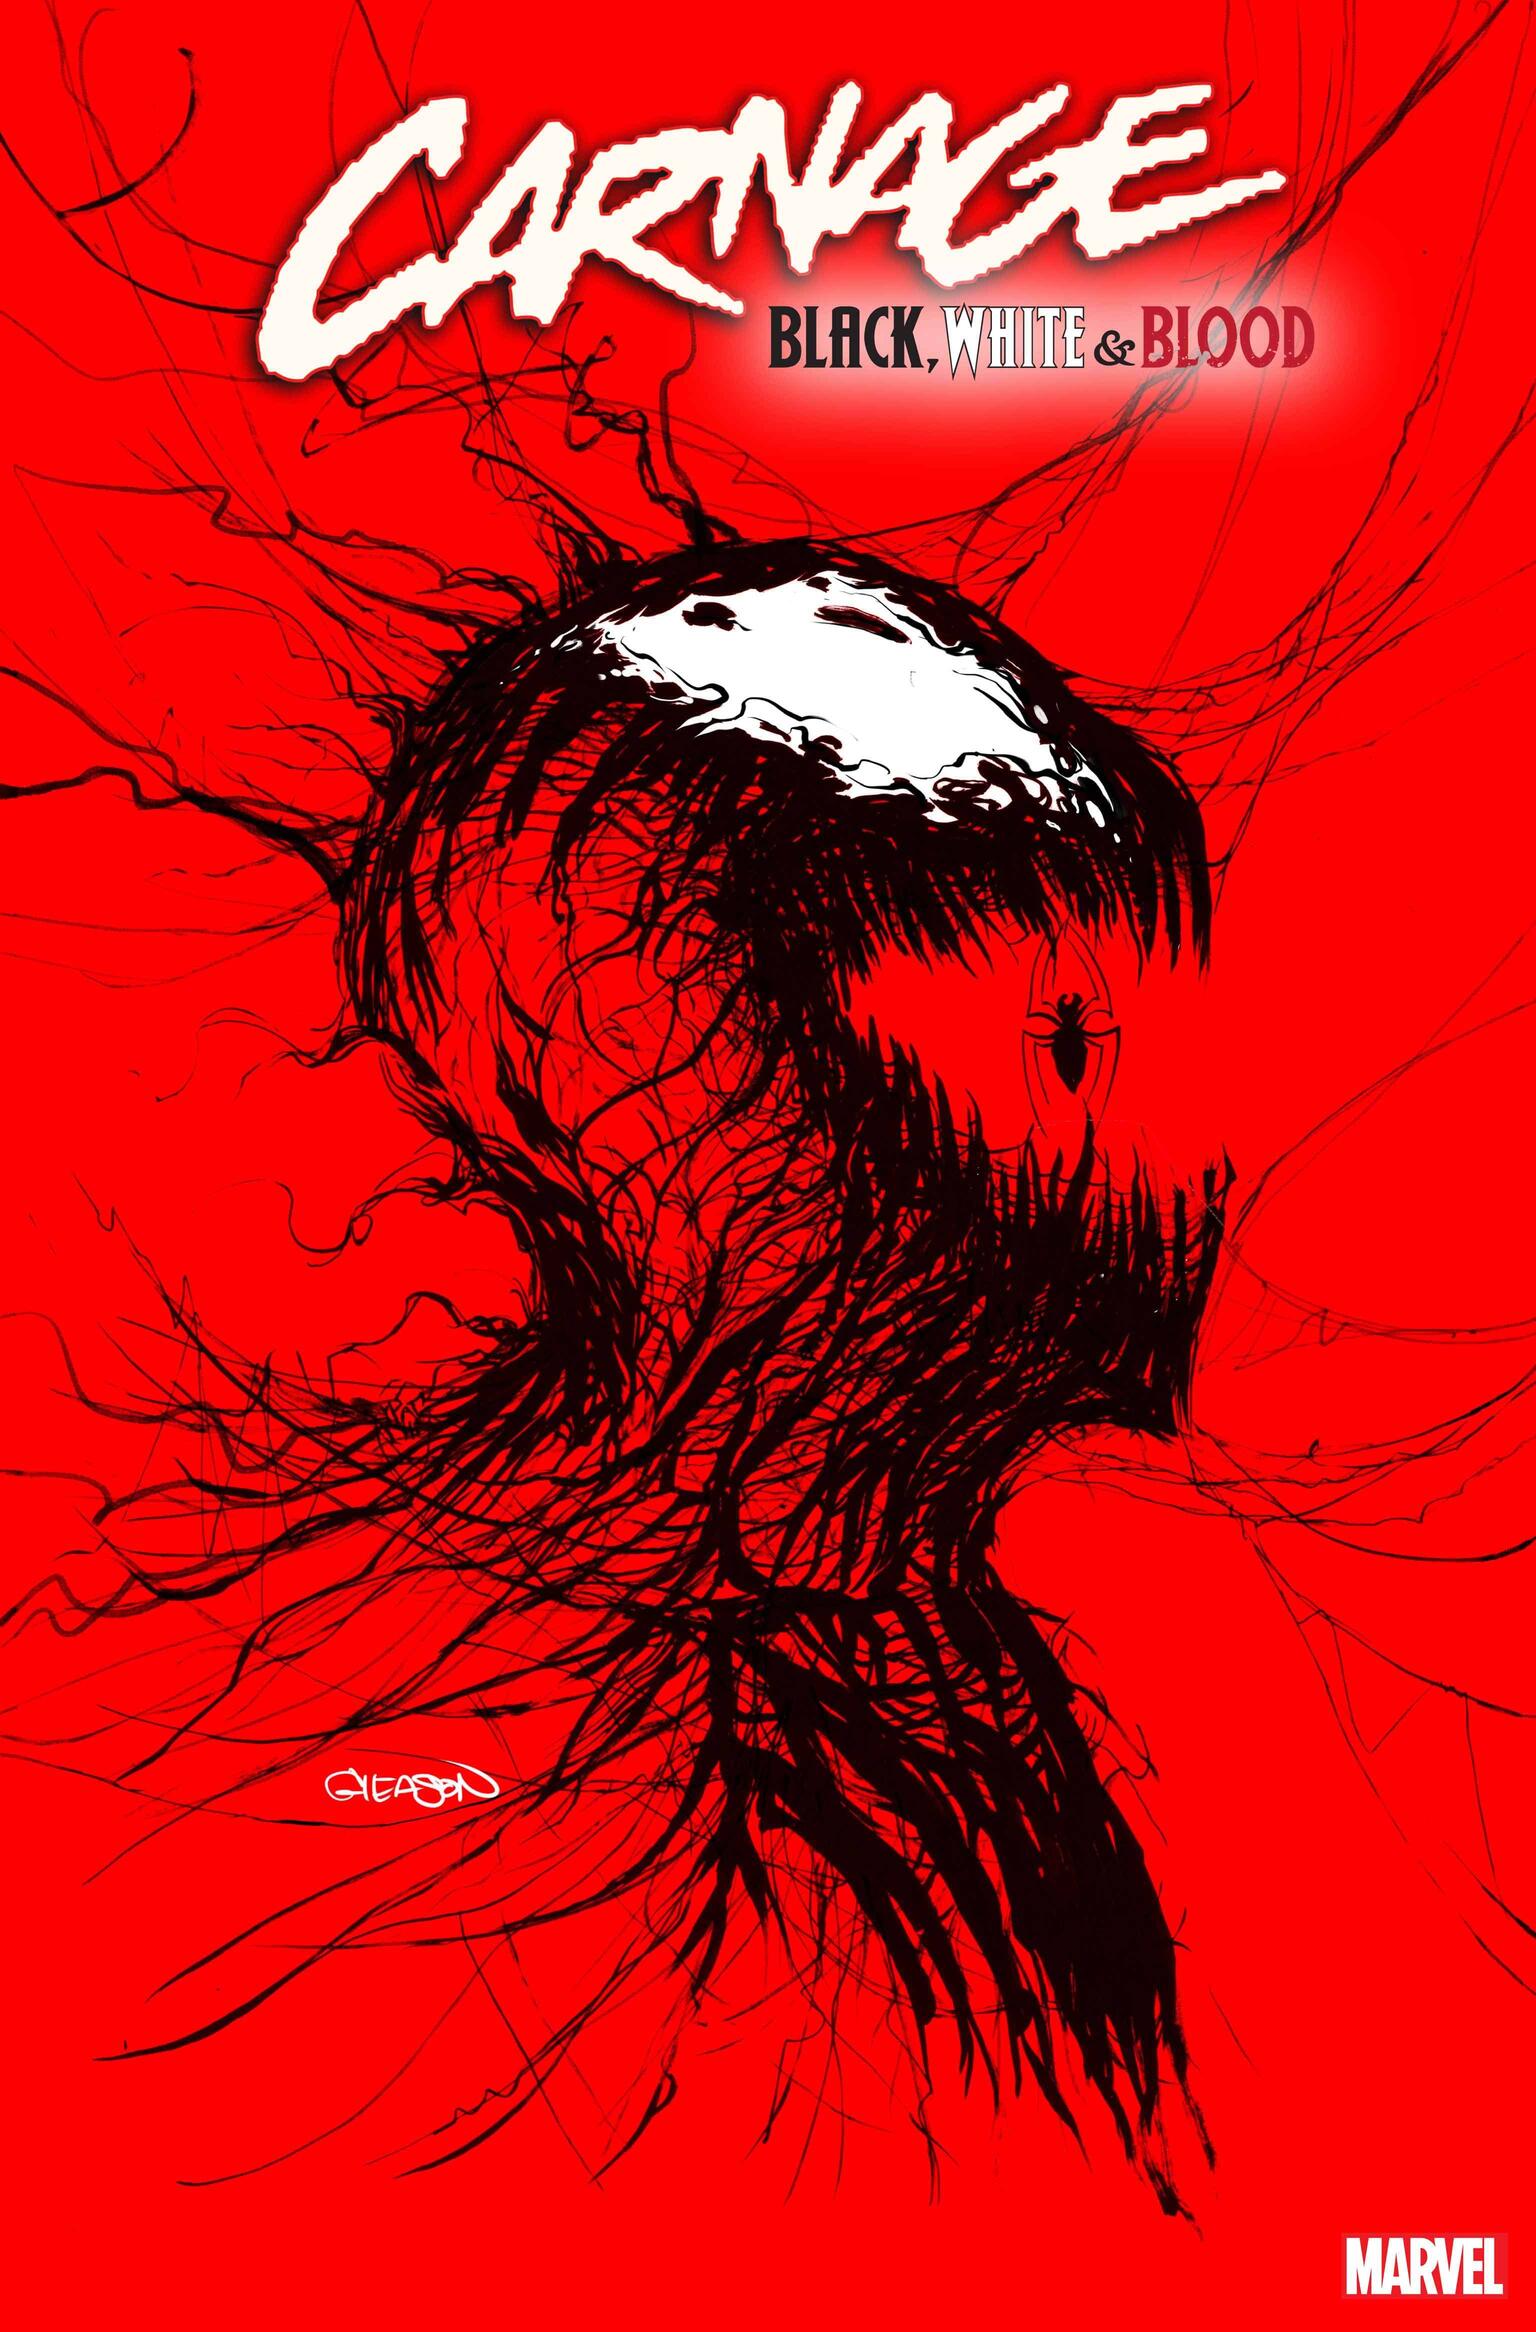 CARNAGE BLACK WHITE AND BLOOD #1 (OF 4) GLEASON VARIANT 03/24/21